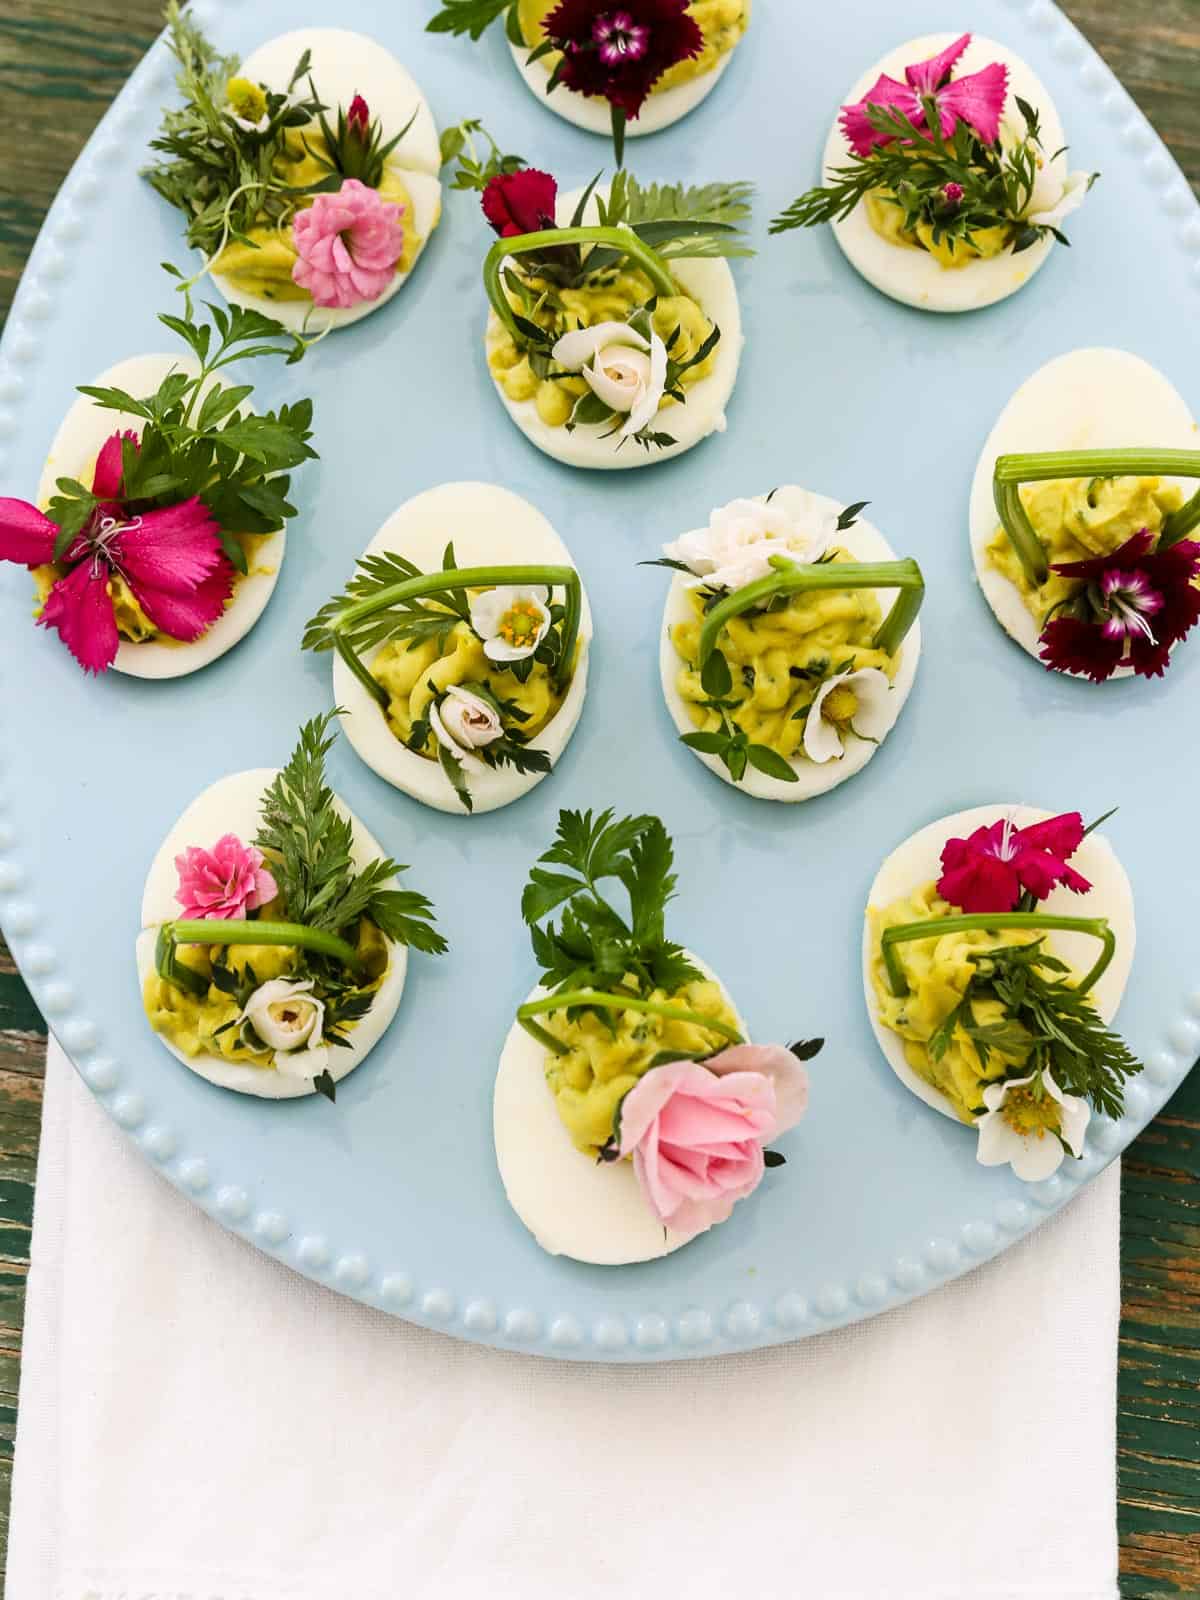 One of the best Easter Dinner Ideas a pastel blue plate loaded with deviled eggs for Easter decorated with edible flowers and herbs.